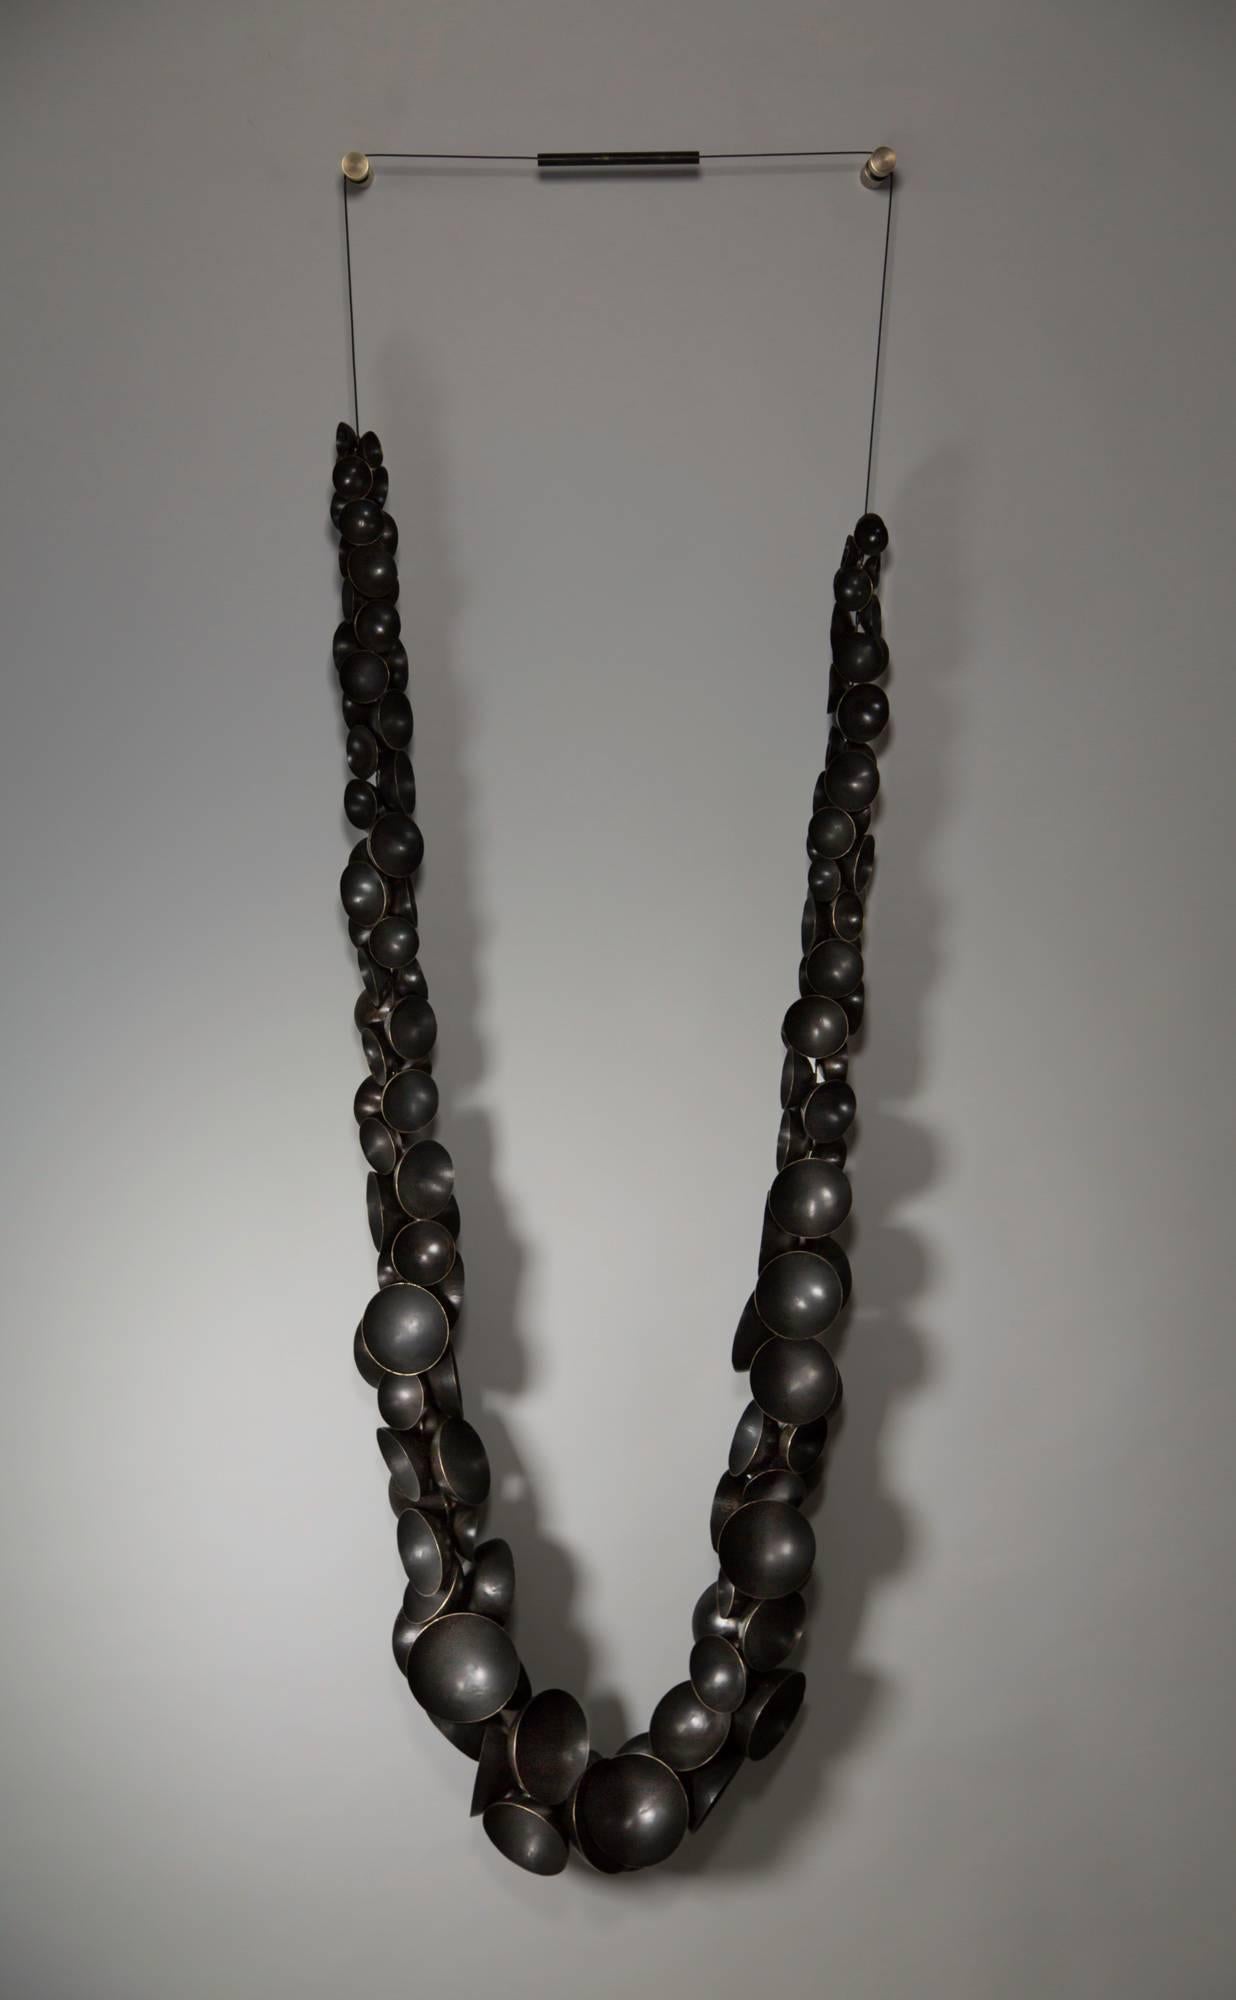 Exhibited at public art gallery Saatchi, London as part of 'Transfiguration', 2018.

Lei for Bertoia, is a tribute to the 